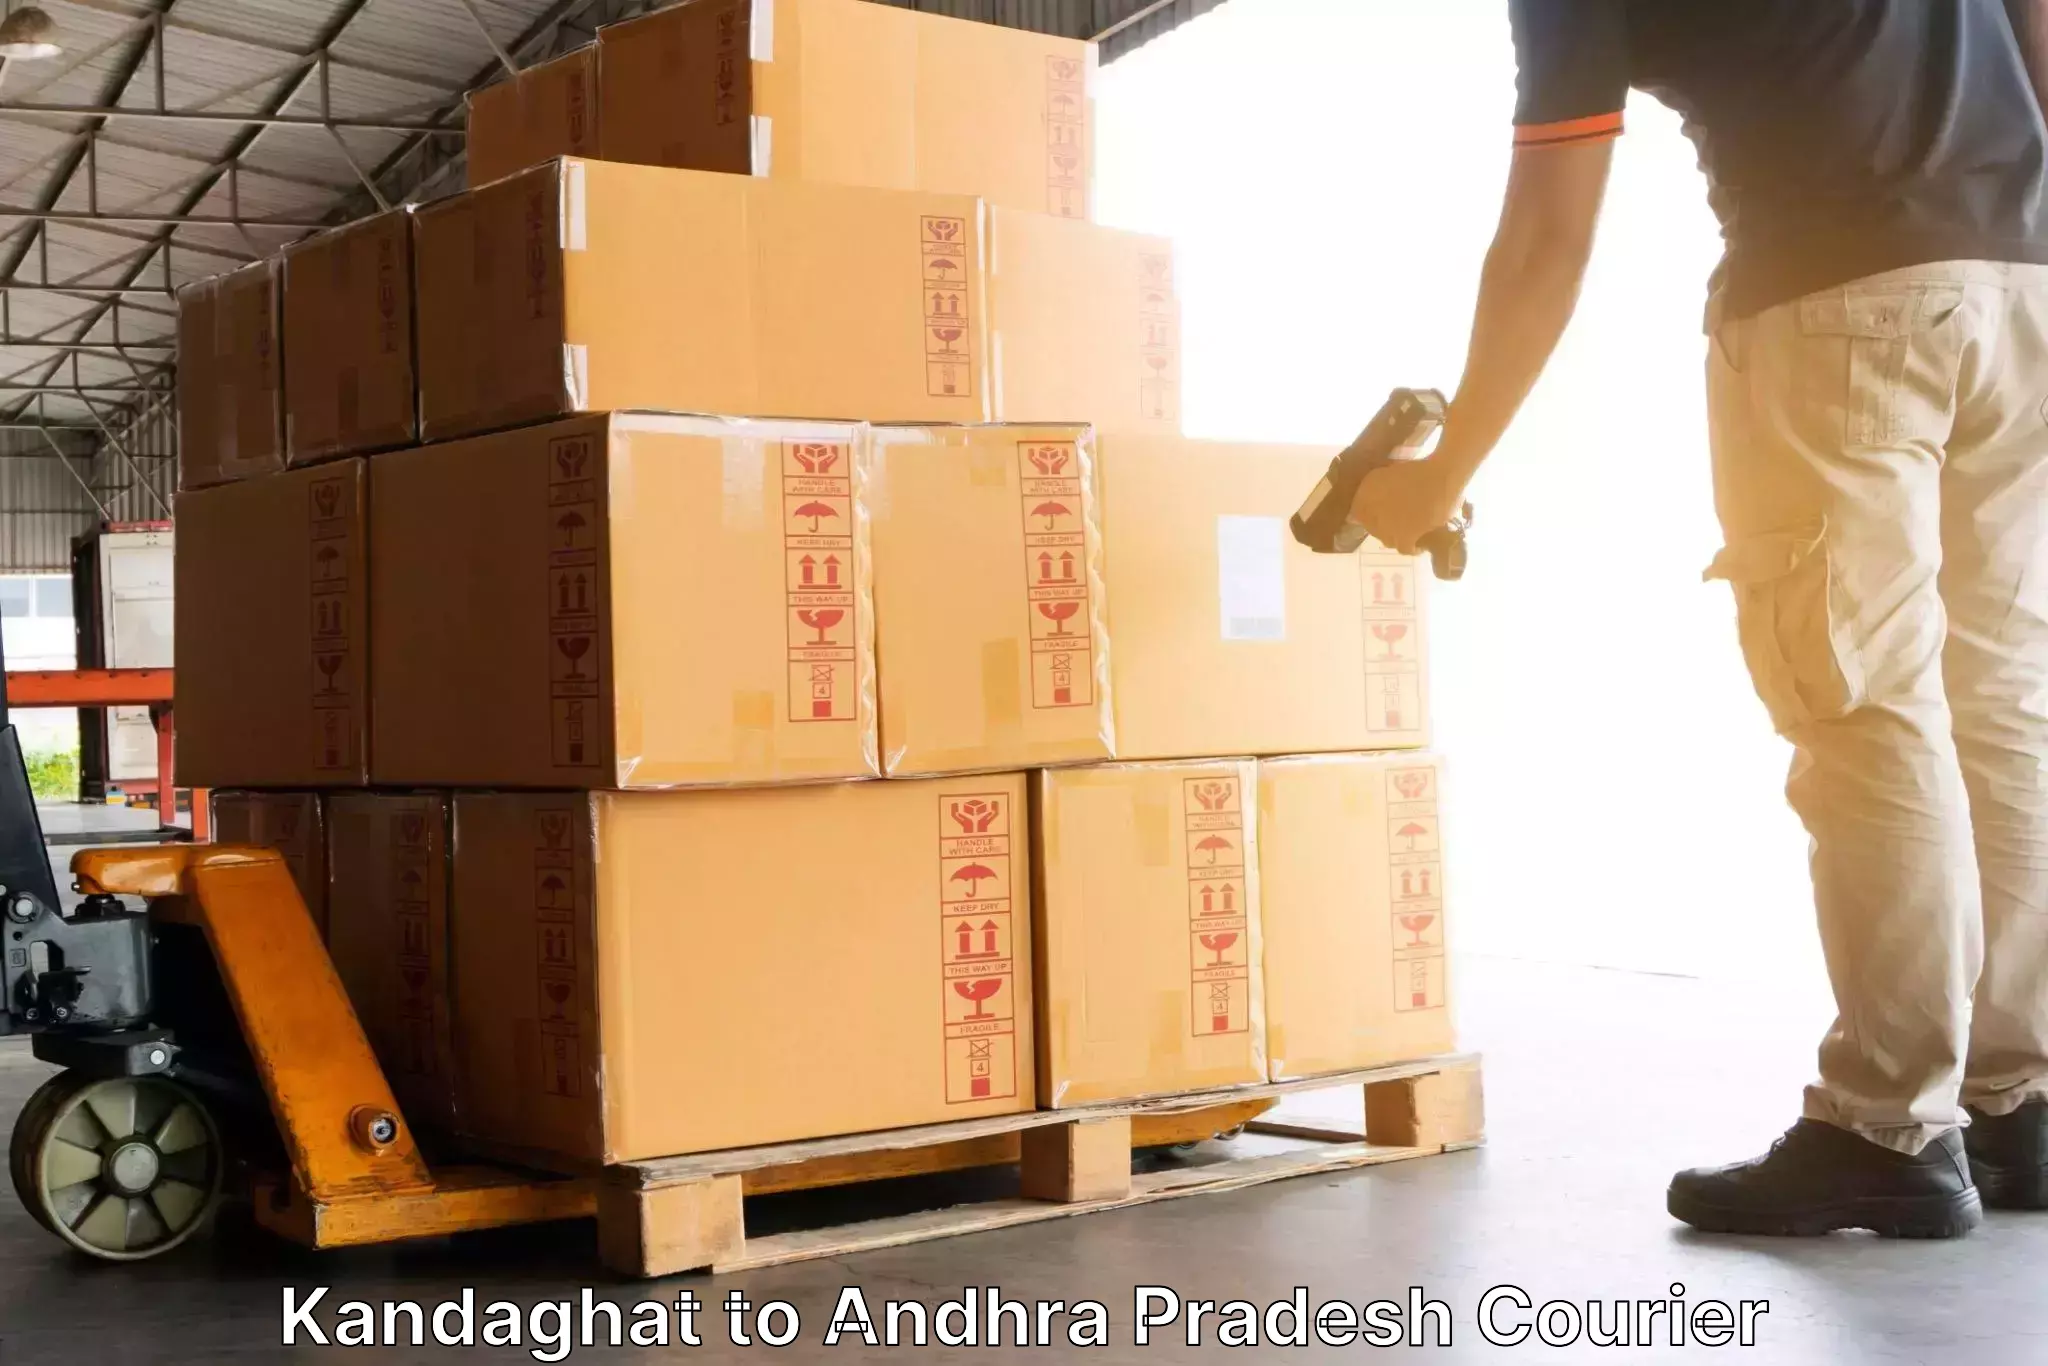 Premium delivery services Kandaghat to Gudivada